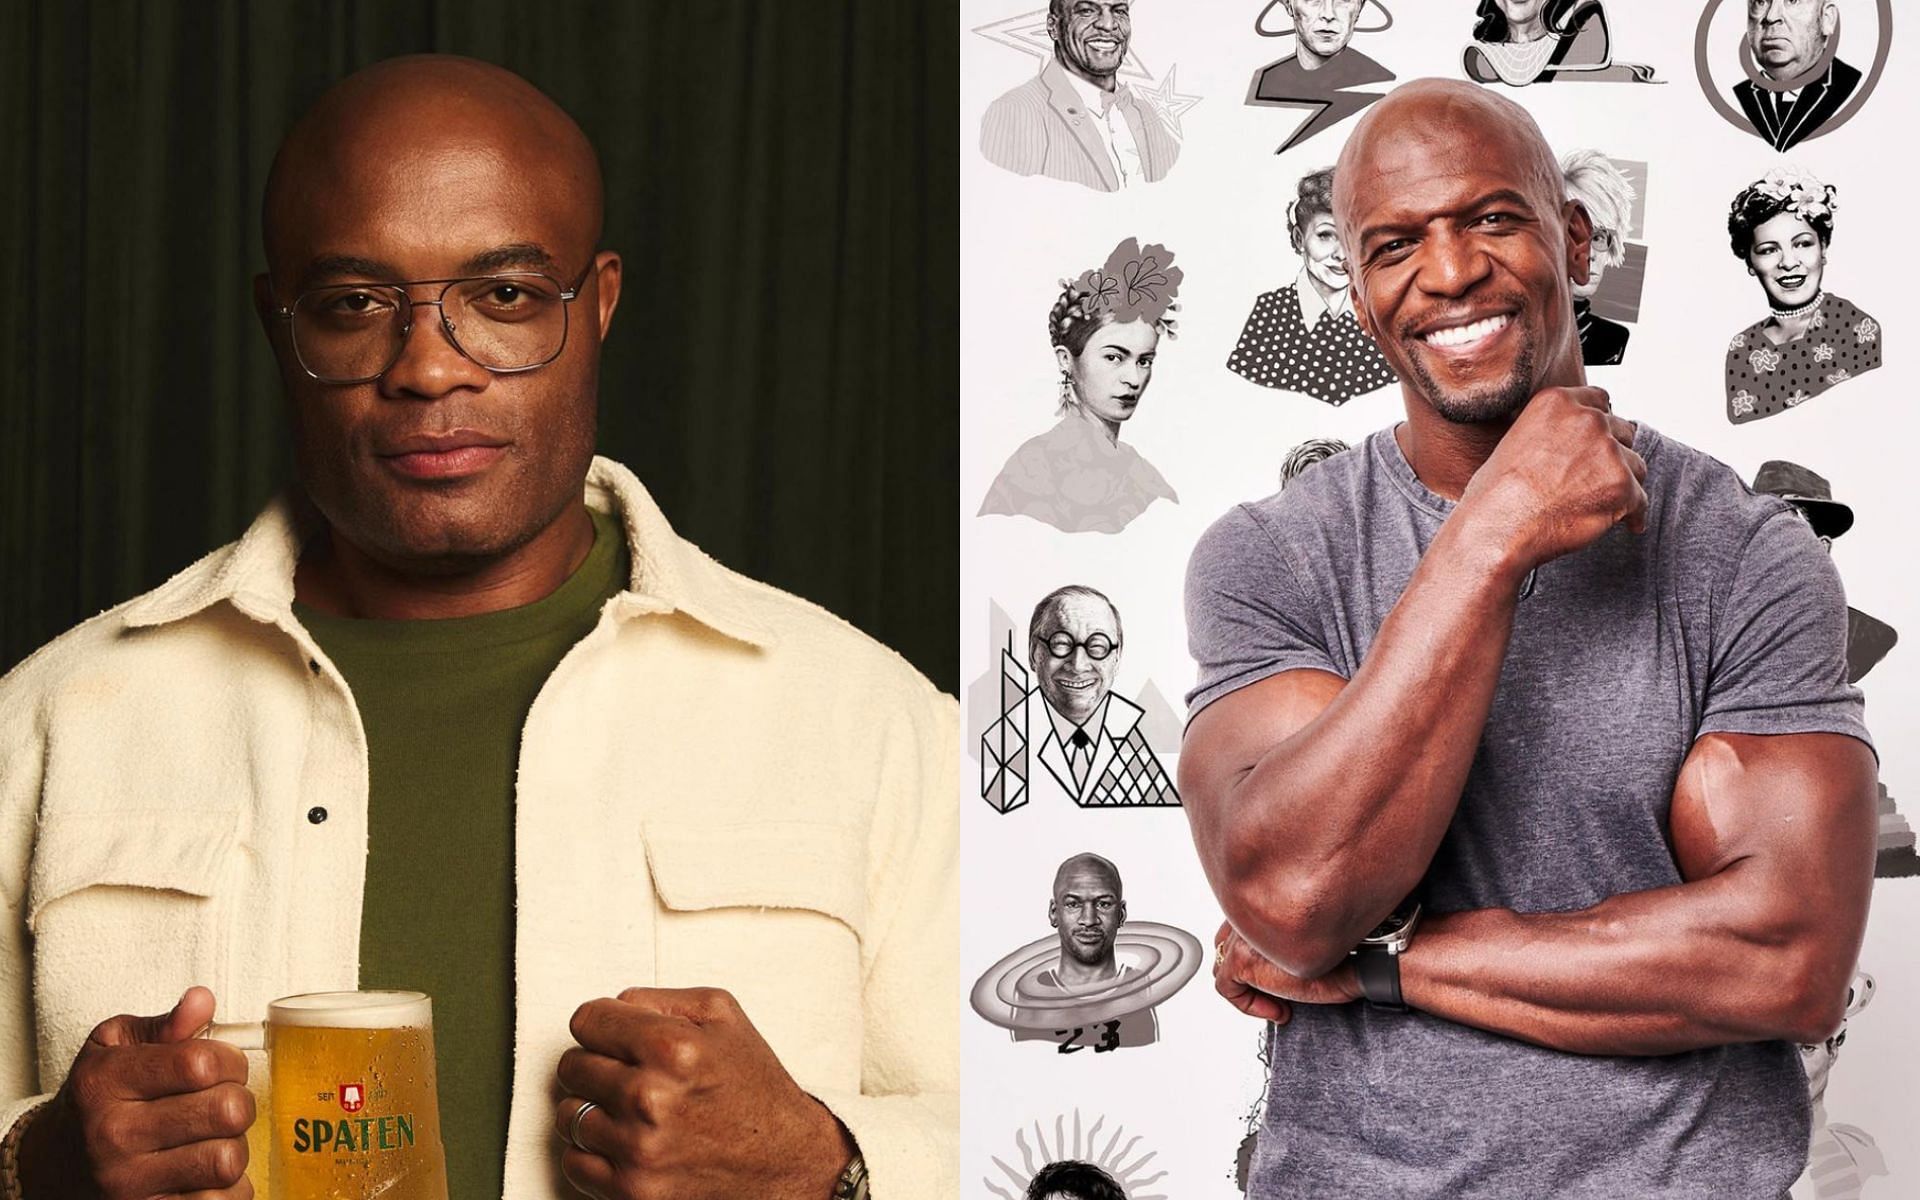 Anderson Silva (left) denies boxing fight with Terry Crews (right) despite previously accepting a callout from the actor [Photo Courtesy @spiderandersonsilva and @terrycrews on Instagram]